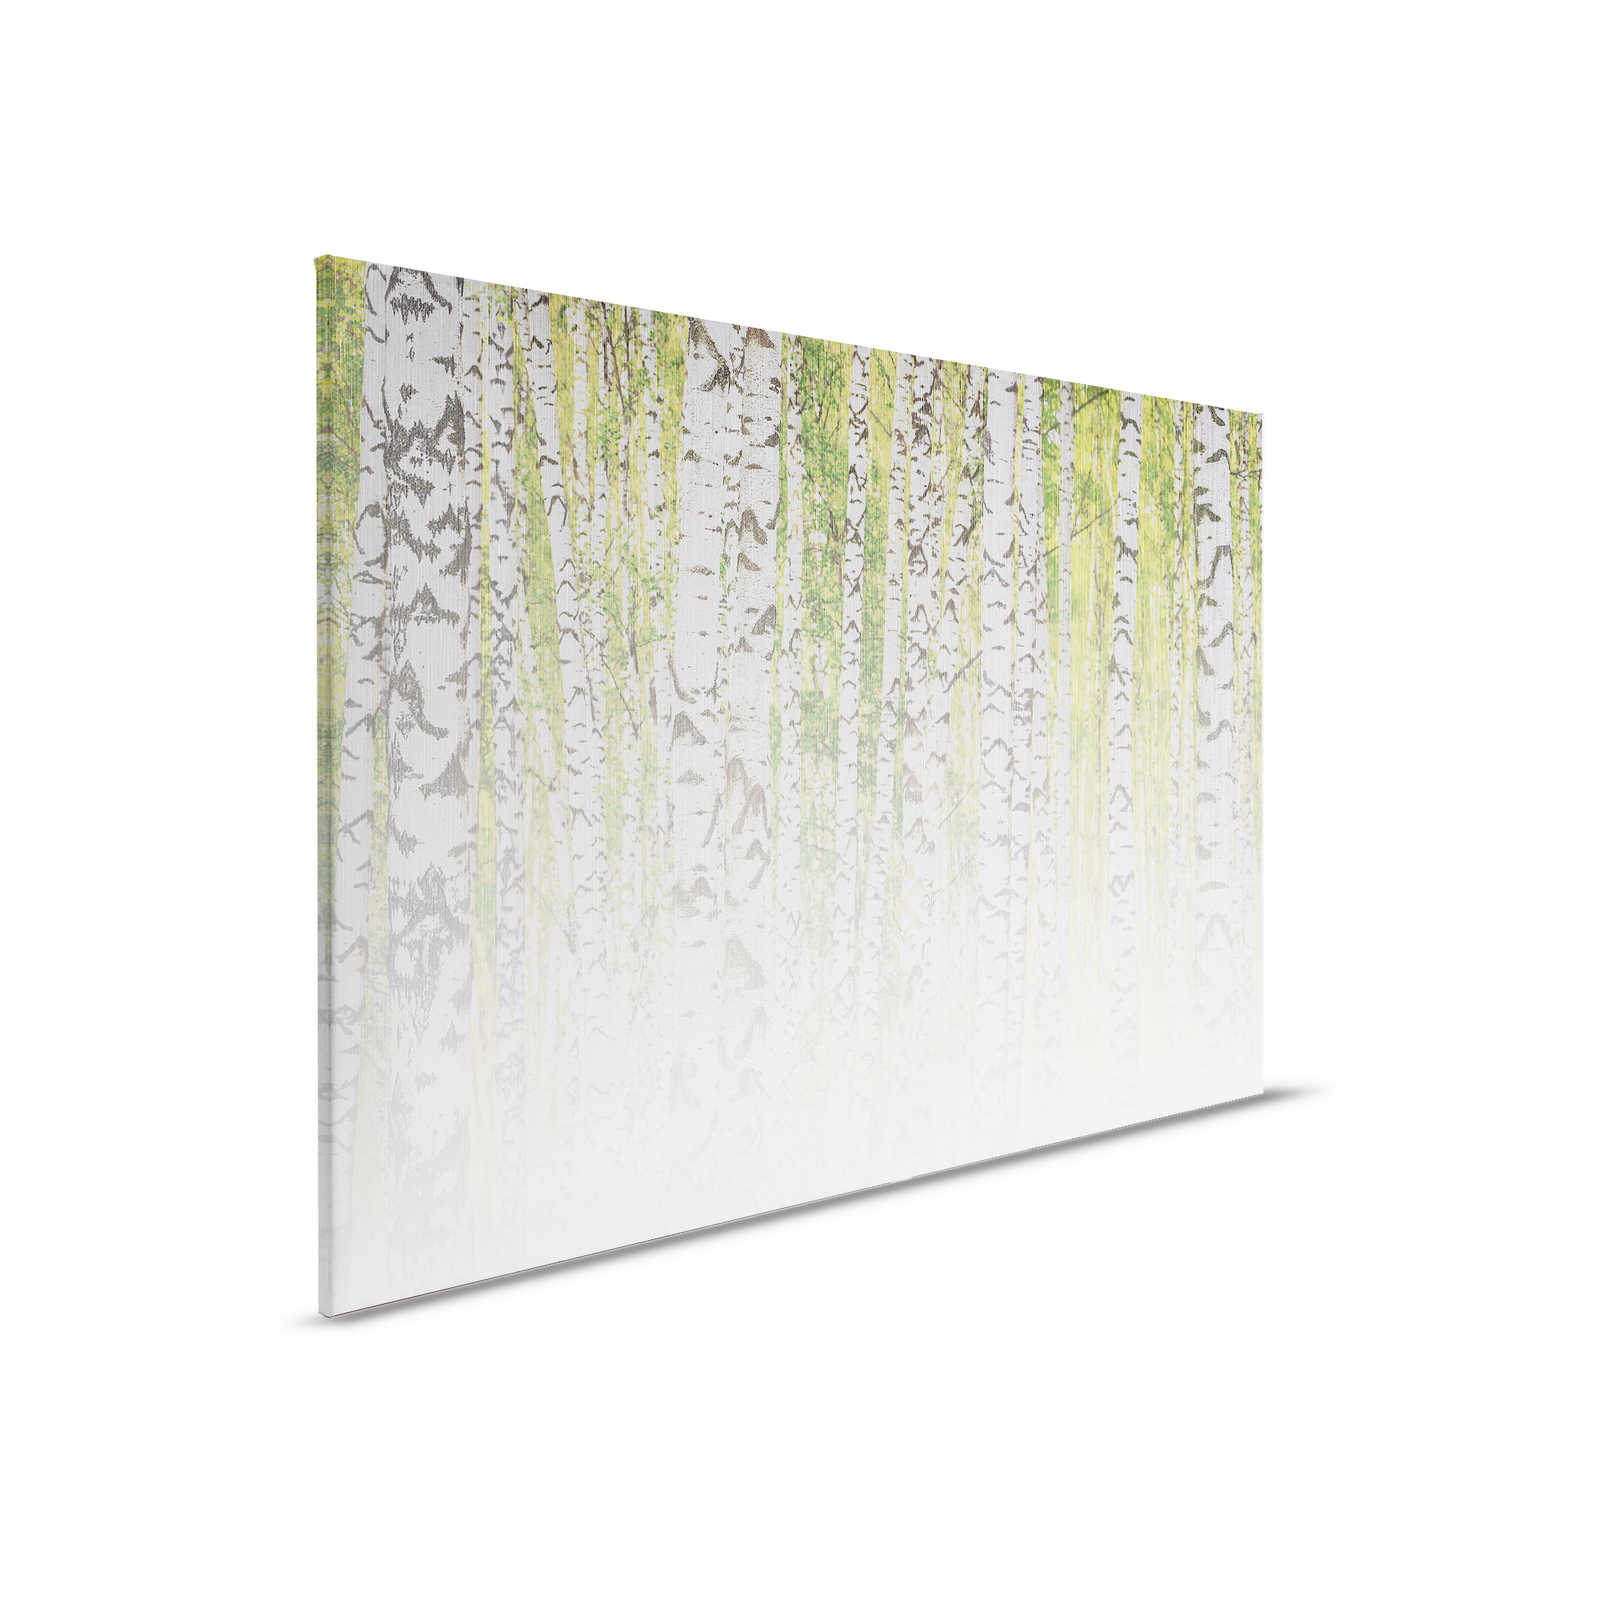         Canvas painting with birch forest in linen structure look - 0.90 m x 0.60 m
    